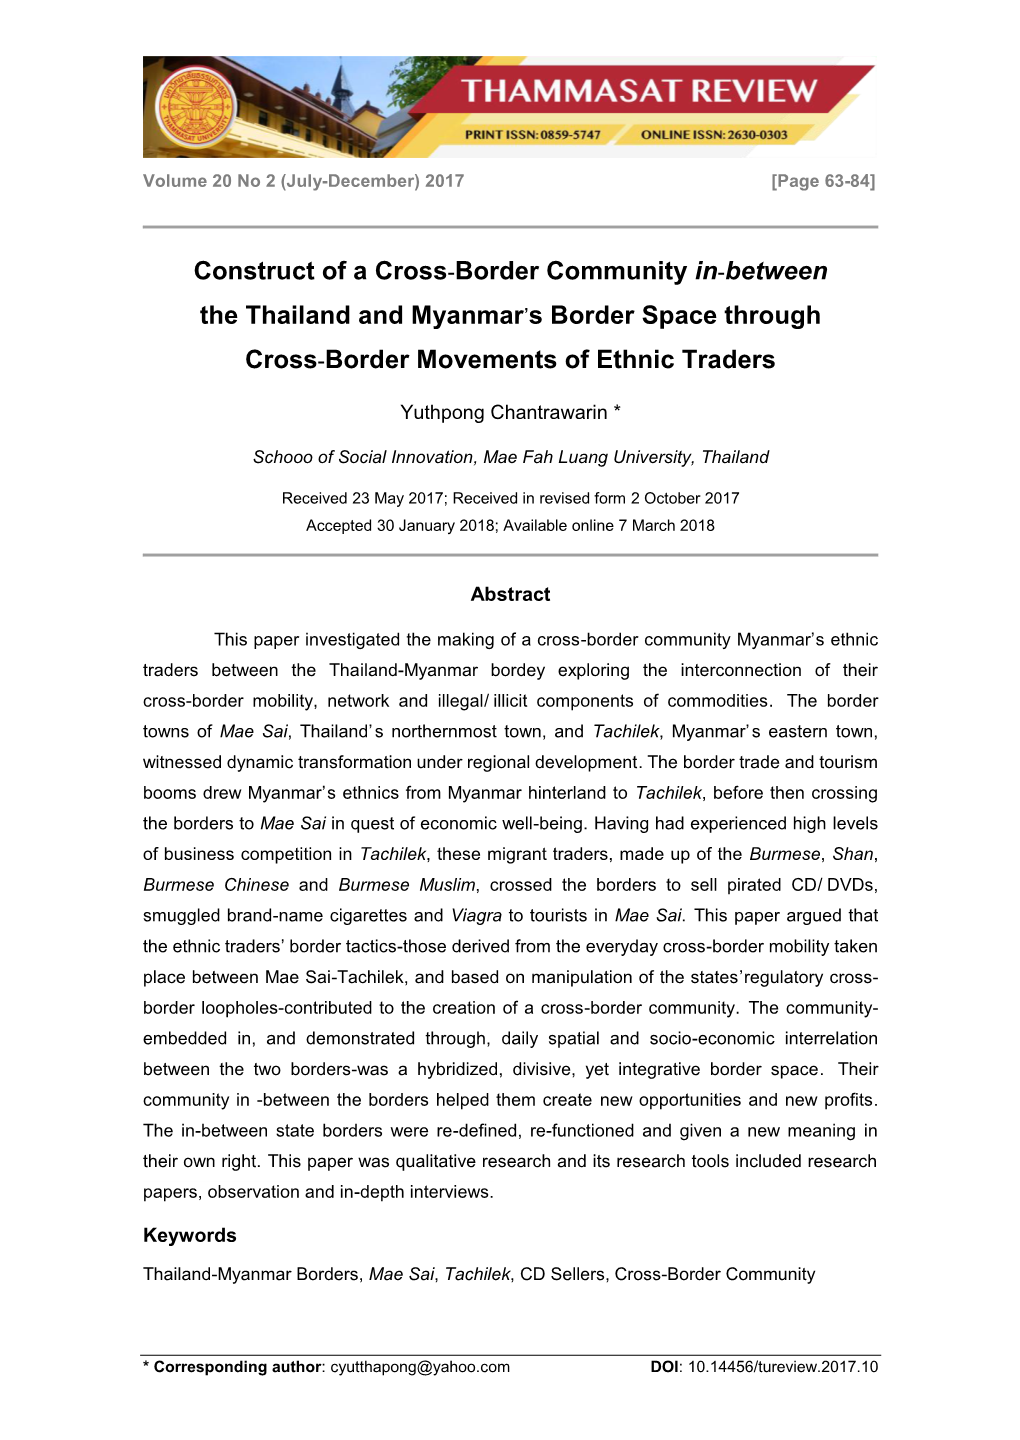 Construct of a Cross-Border Community In-Between the Thailand and Myanmar’S Border Space Through